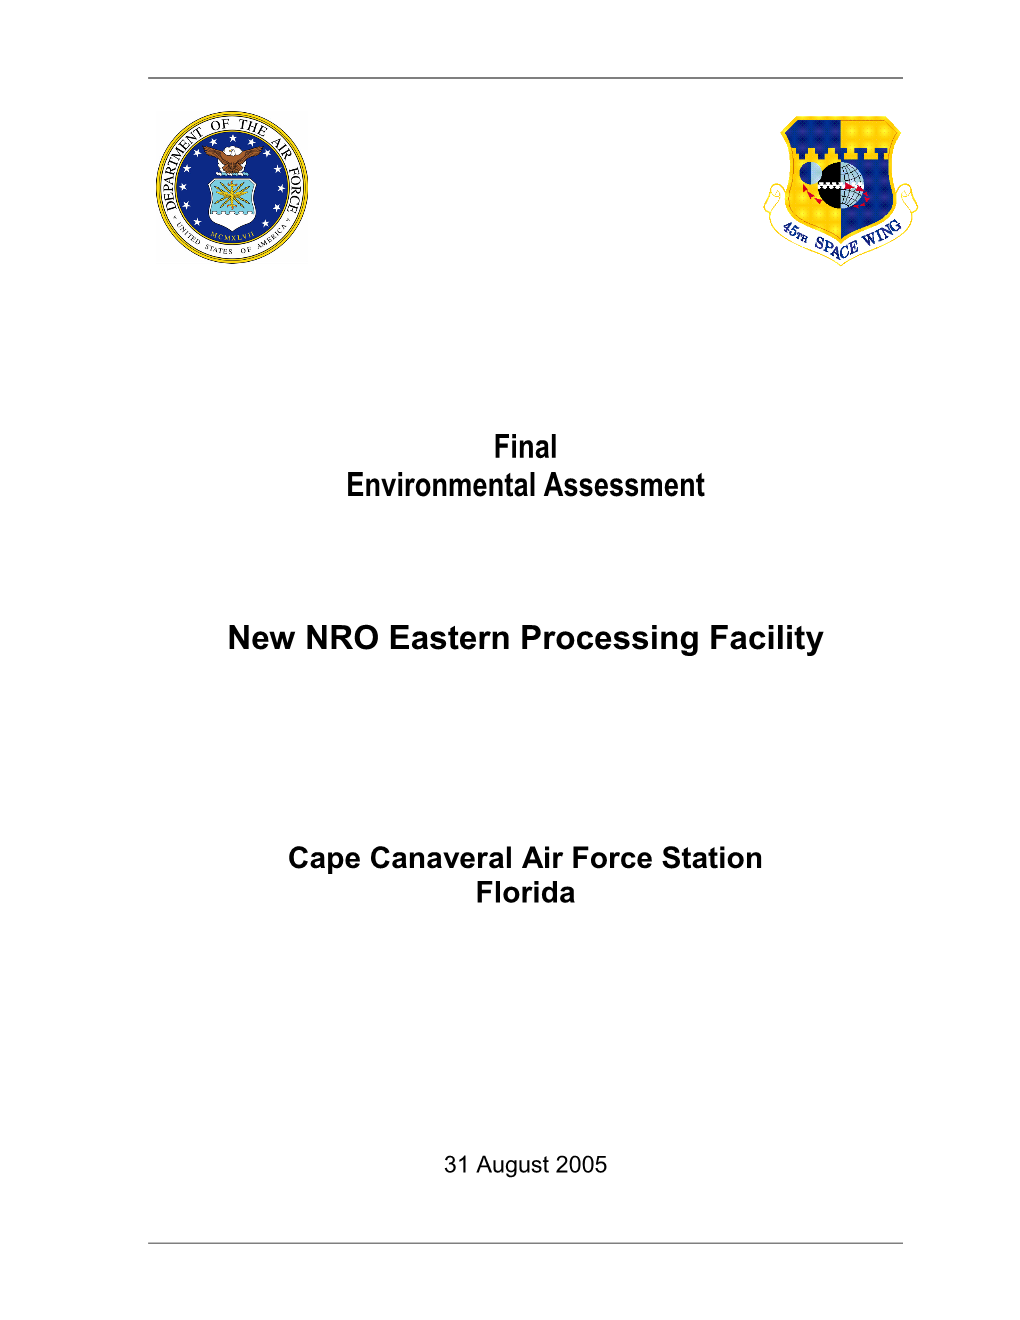 New NRO Eastern Processing Facility at Cape Canaveral Air Force Station- Cape Canaveral, Brevard County, Florida